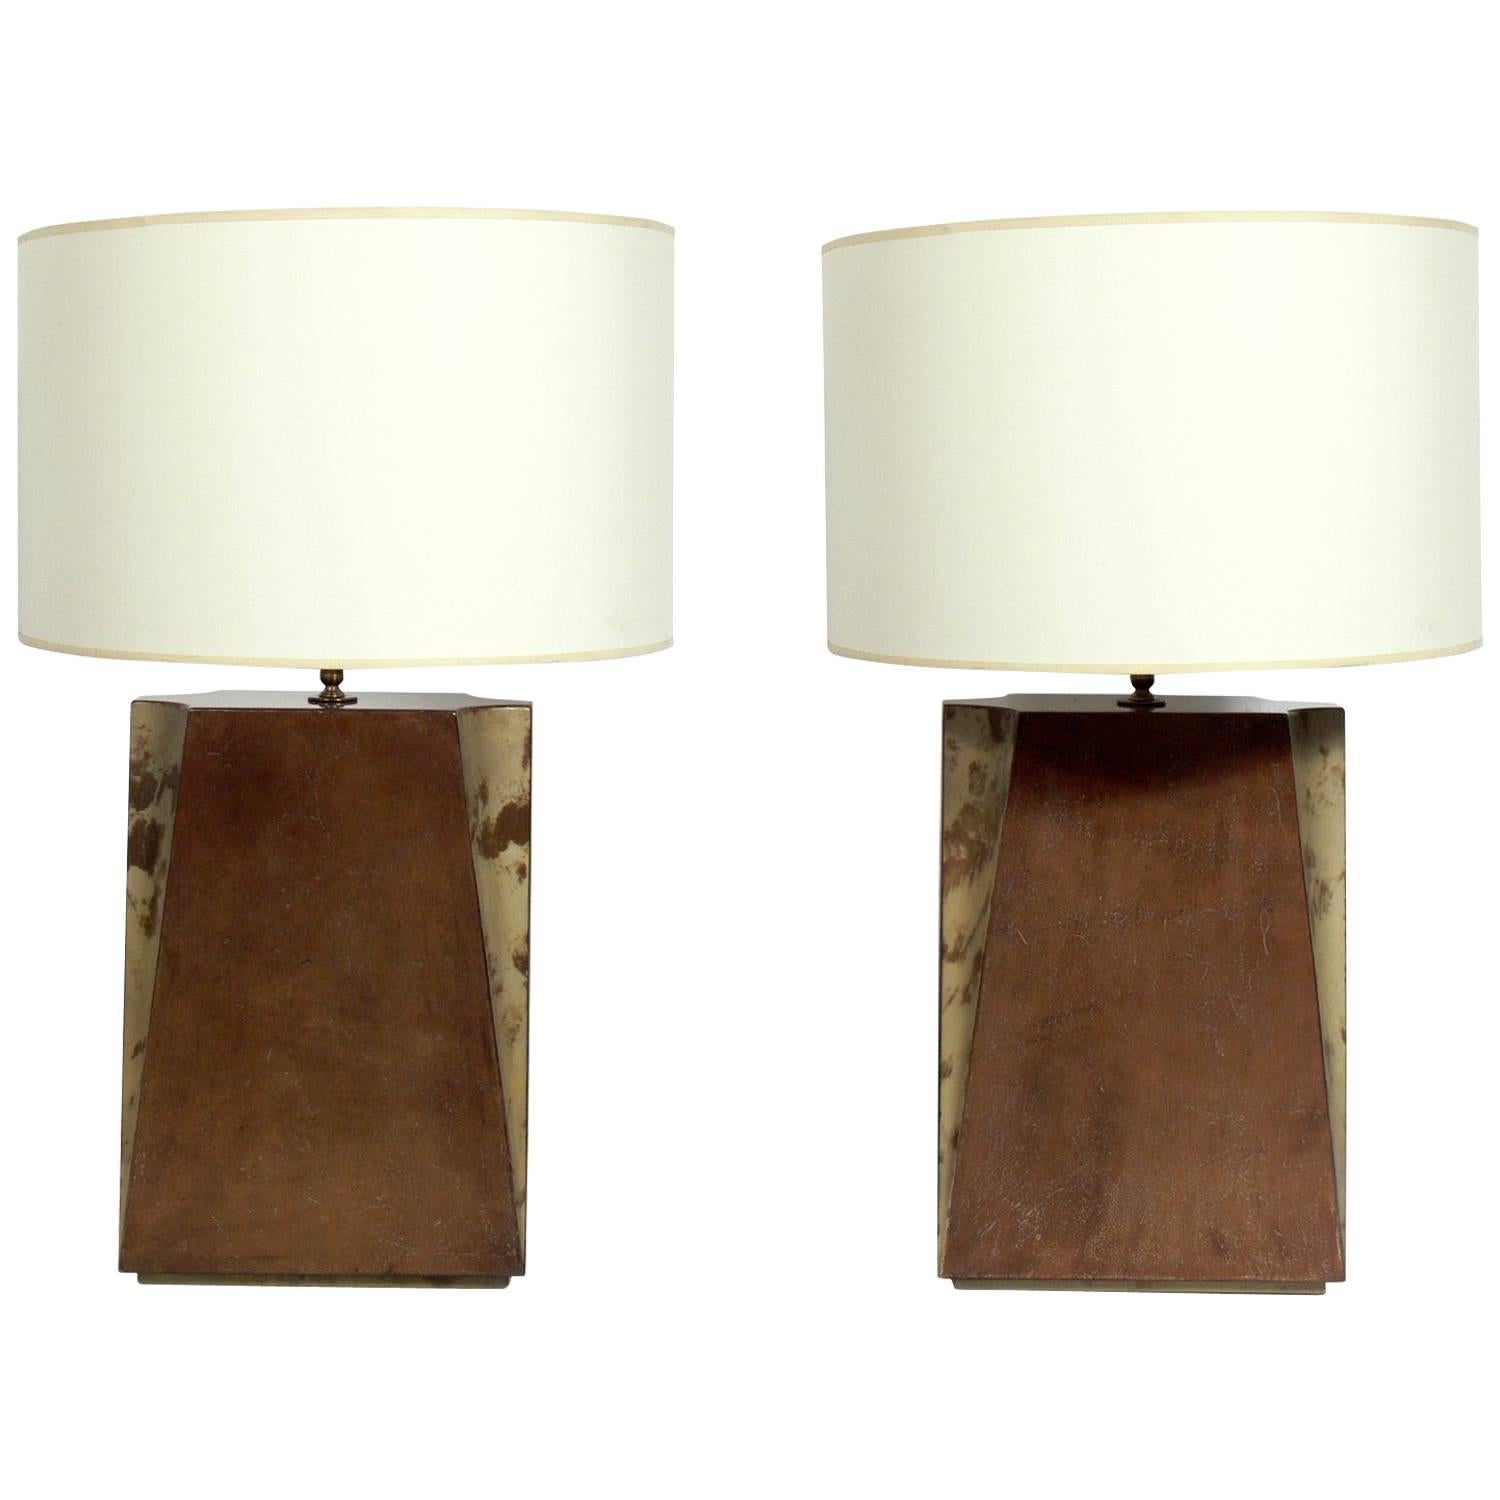 Pair of Large-Scale Lacquered Goatskin Lamps